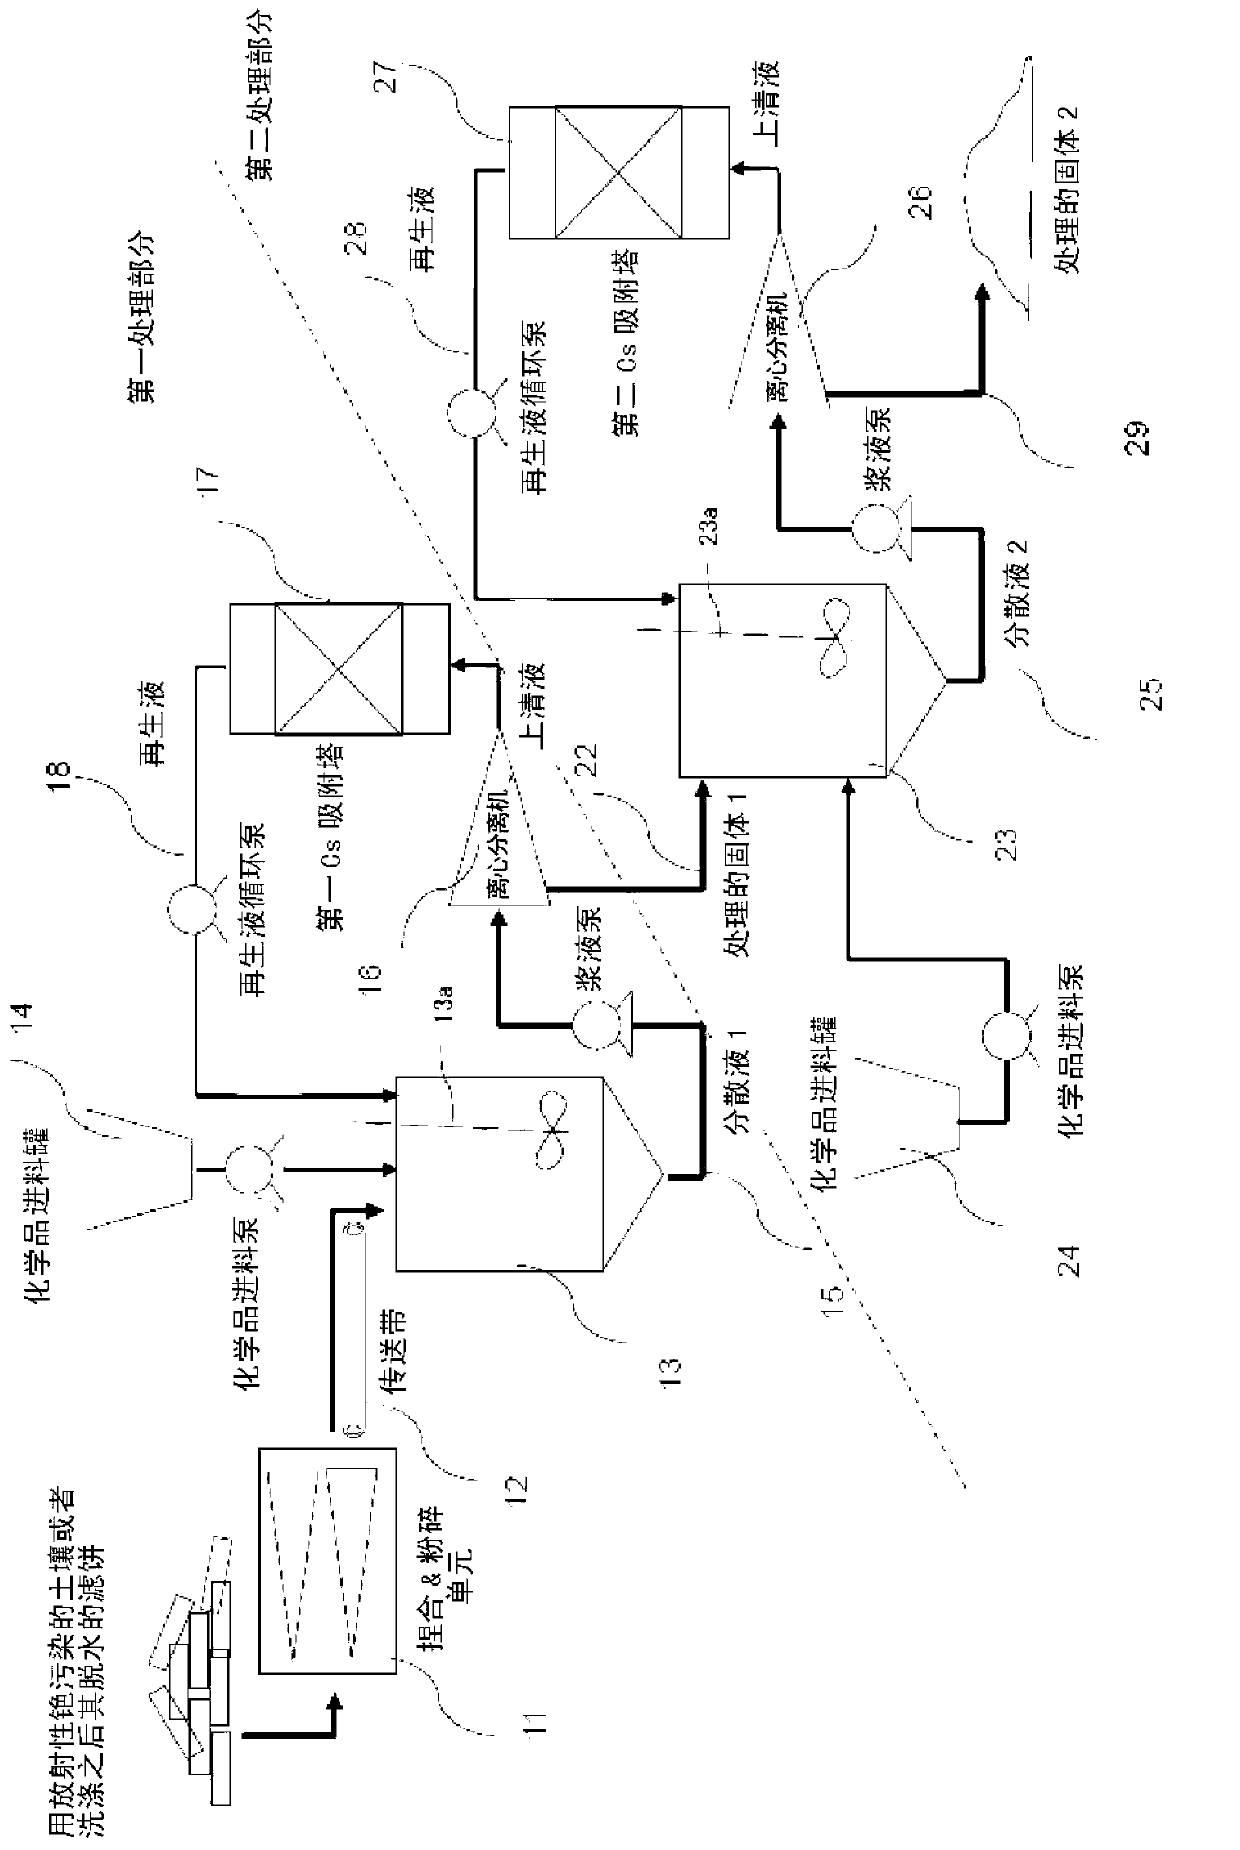 Decontamination method and apparatus for solid-state material contaminated by radiocesium